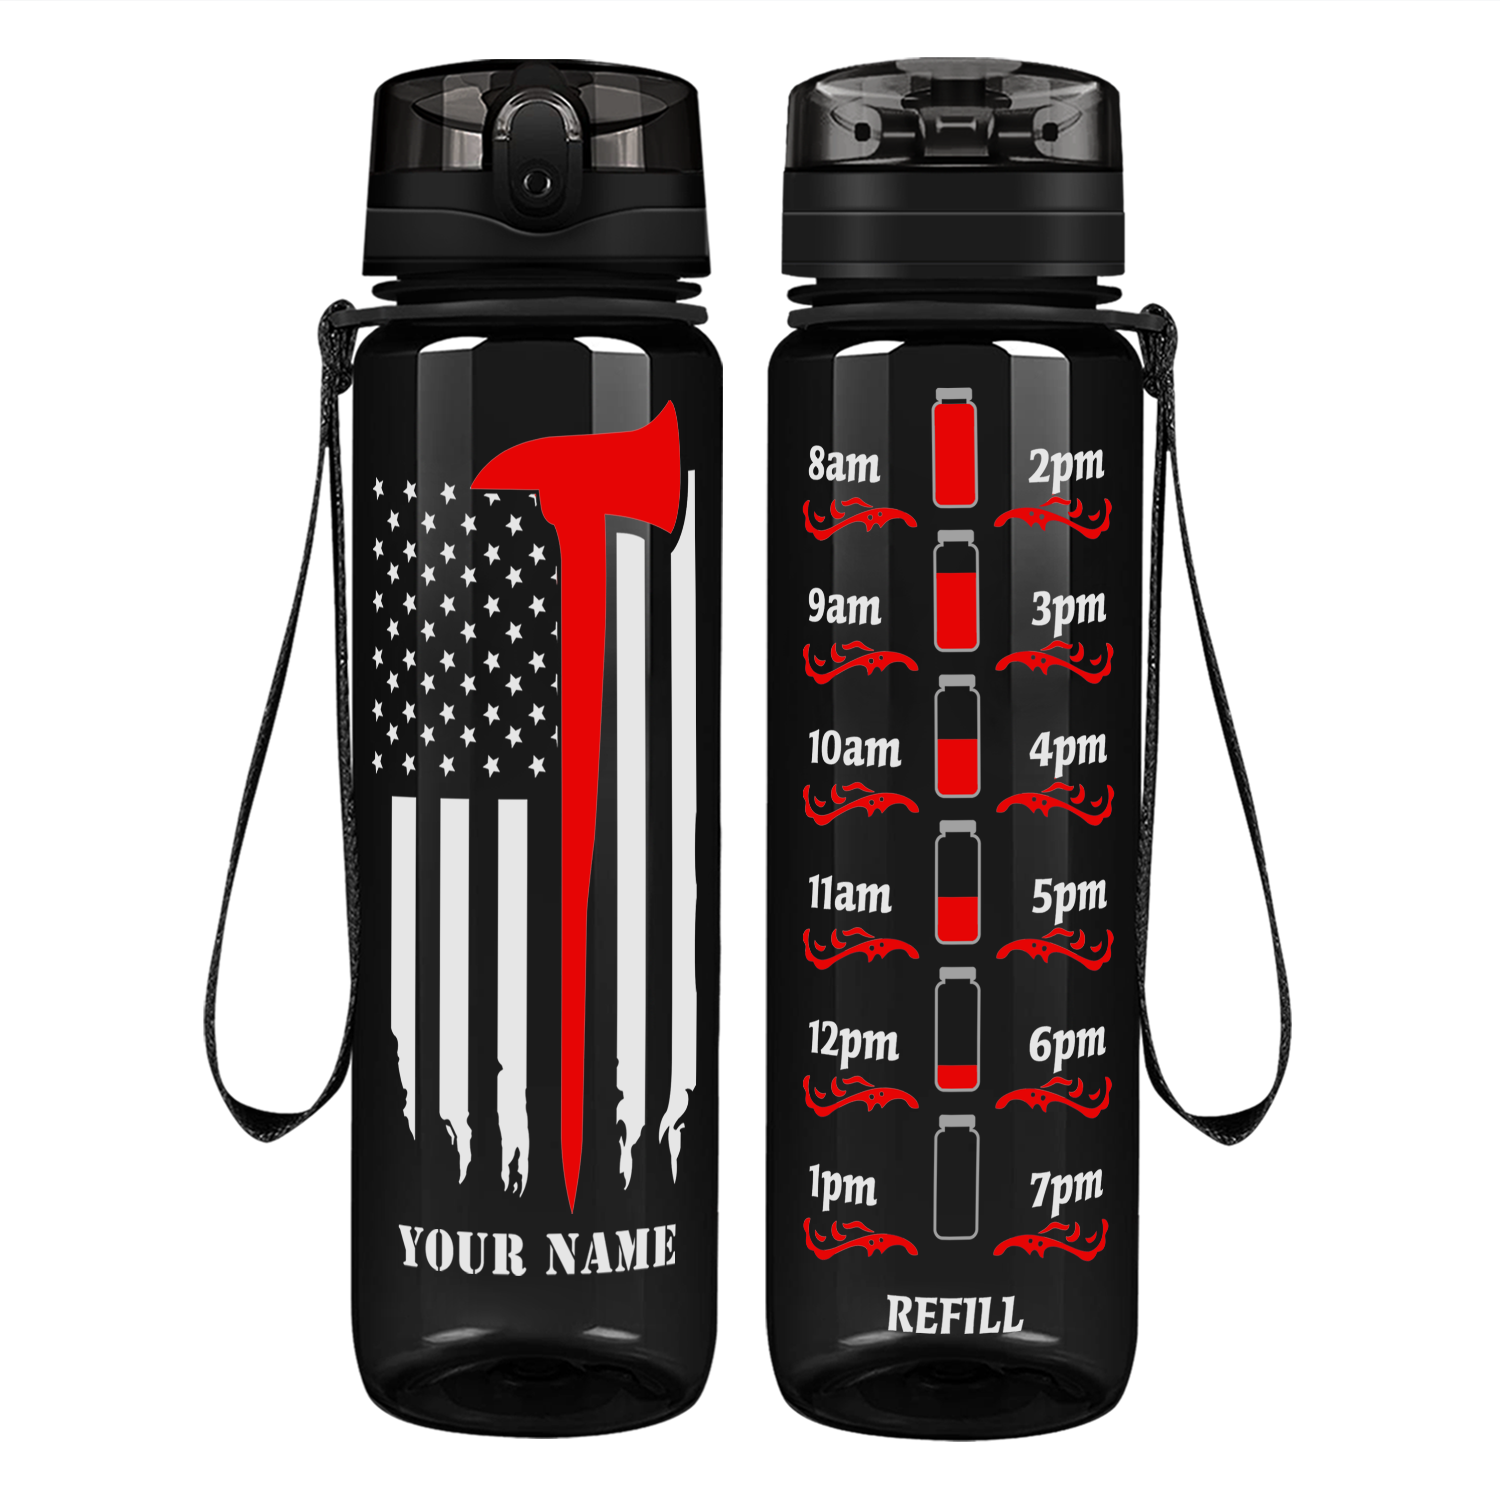 Personalized Firefighter Axe Flag on 32 oz Motivational Tracking Water Bottle